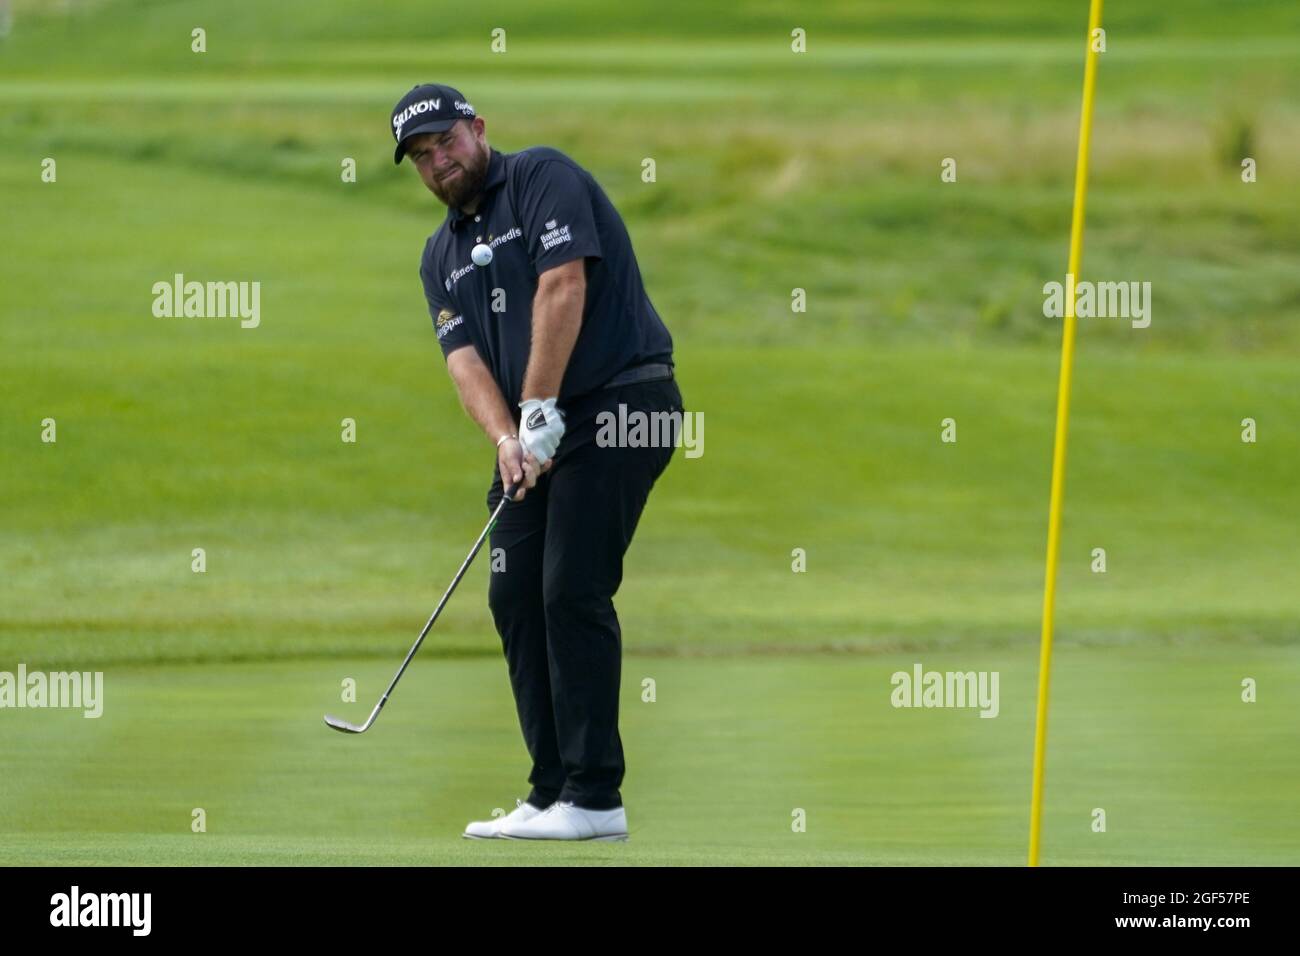 New York, United States. 23rd Aug, 2021. Shane Lowry of Ireland chips onto the green on the 2nd hole in the final round of the 2021 Northern Trust as part of of the The FedEx Cup playoffs at Liberty National Golf Club in Jersey City, New Jersey on Monday, August 23, 2021. Photo by Corey Sipkin/UPI Credit: UPI/Alamy Live News Stock Photo